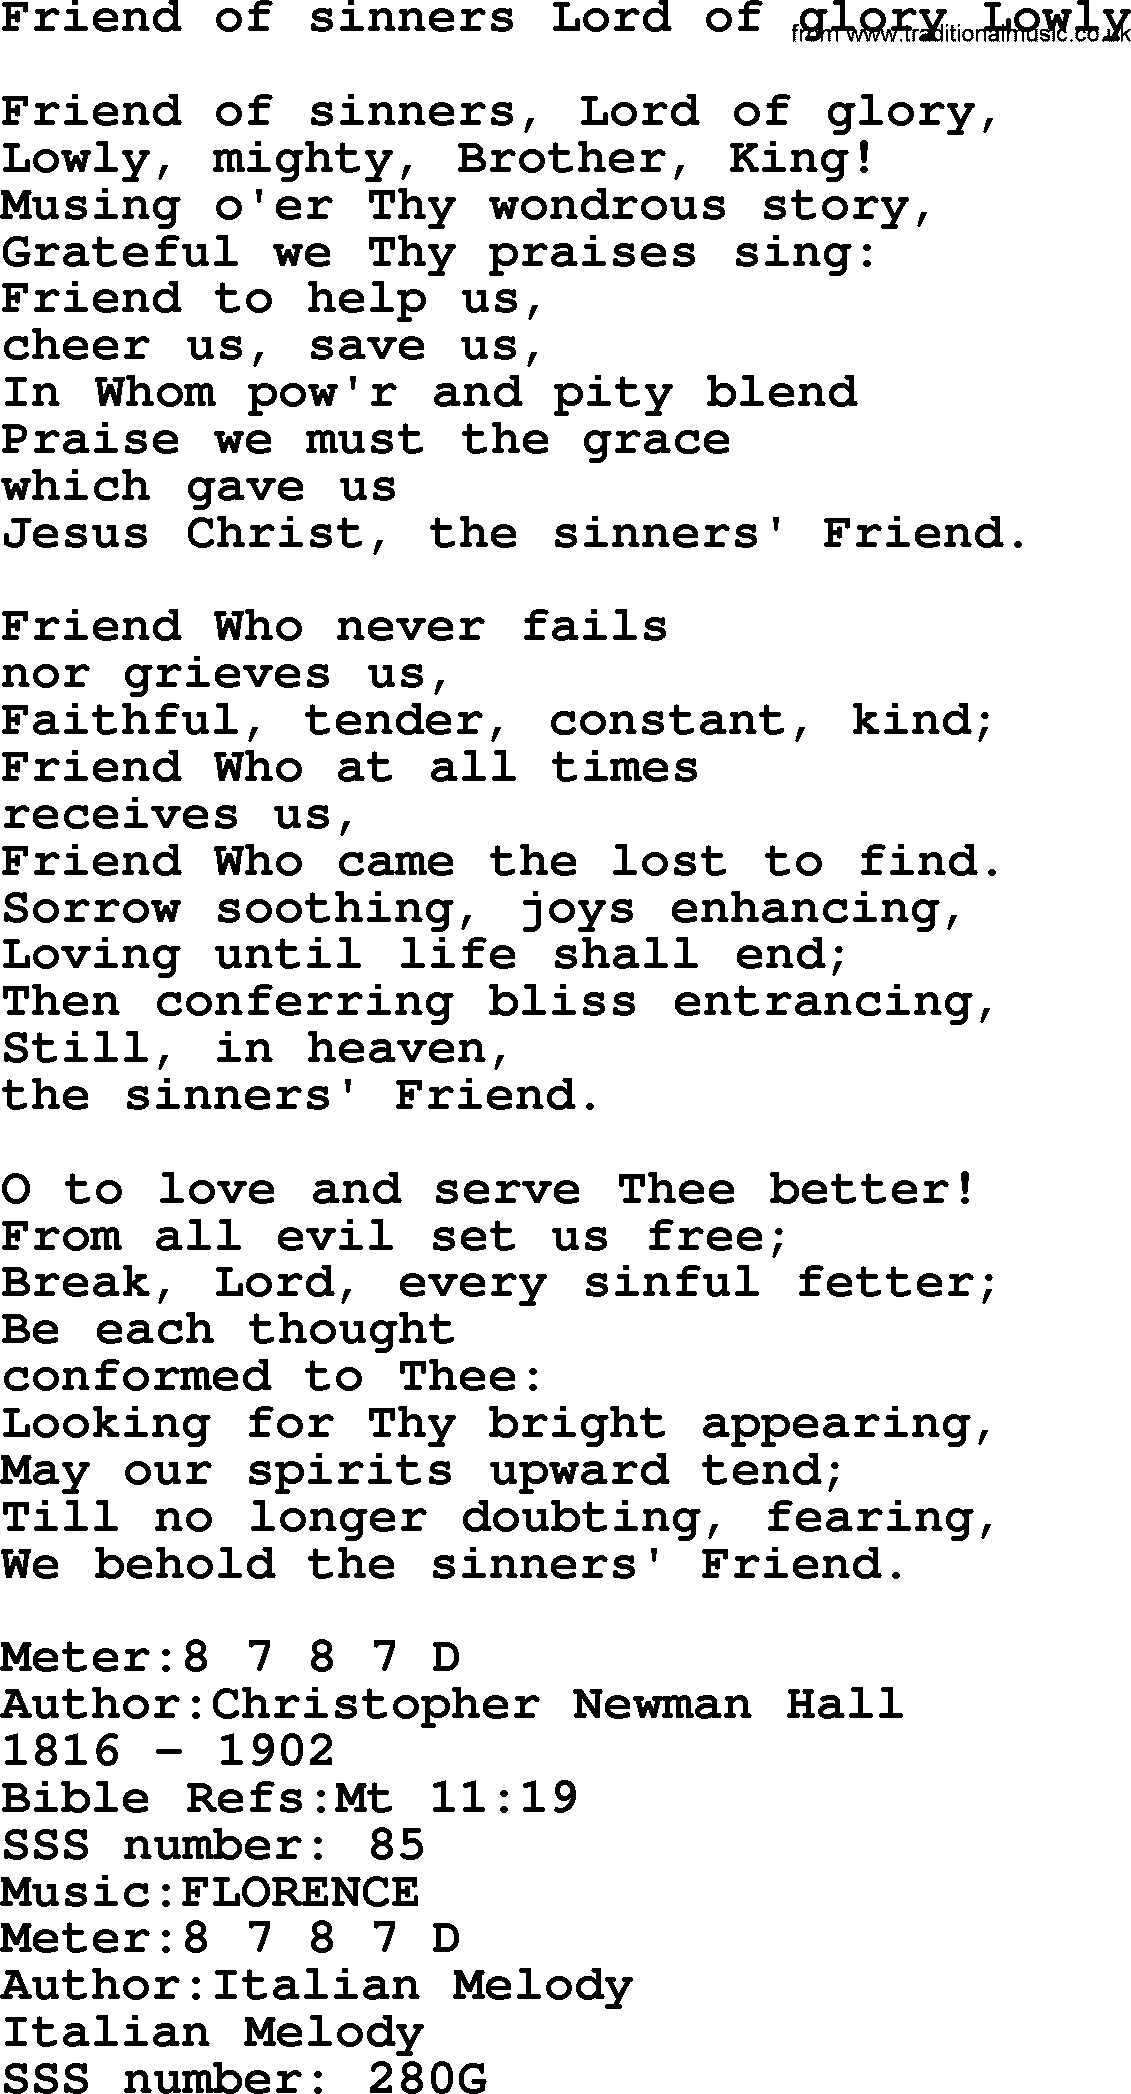 Sacred Songs and Solos complete, 1200 Hymns, title: Friend Of Sinners Lord Of Glory Lowly, lyrics and PDF